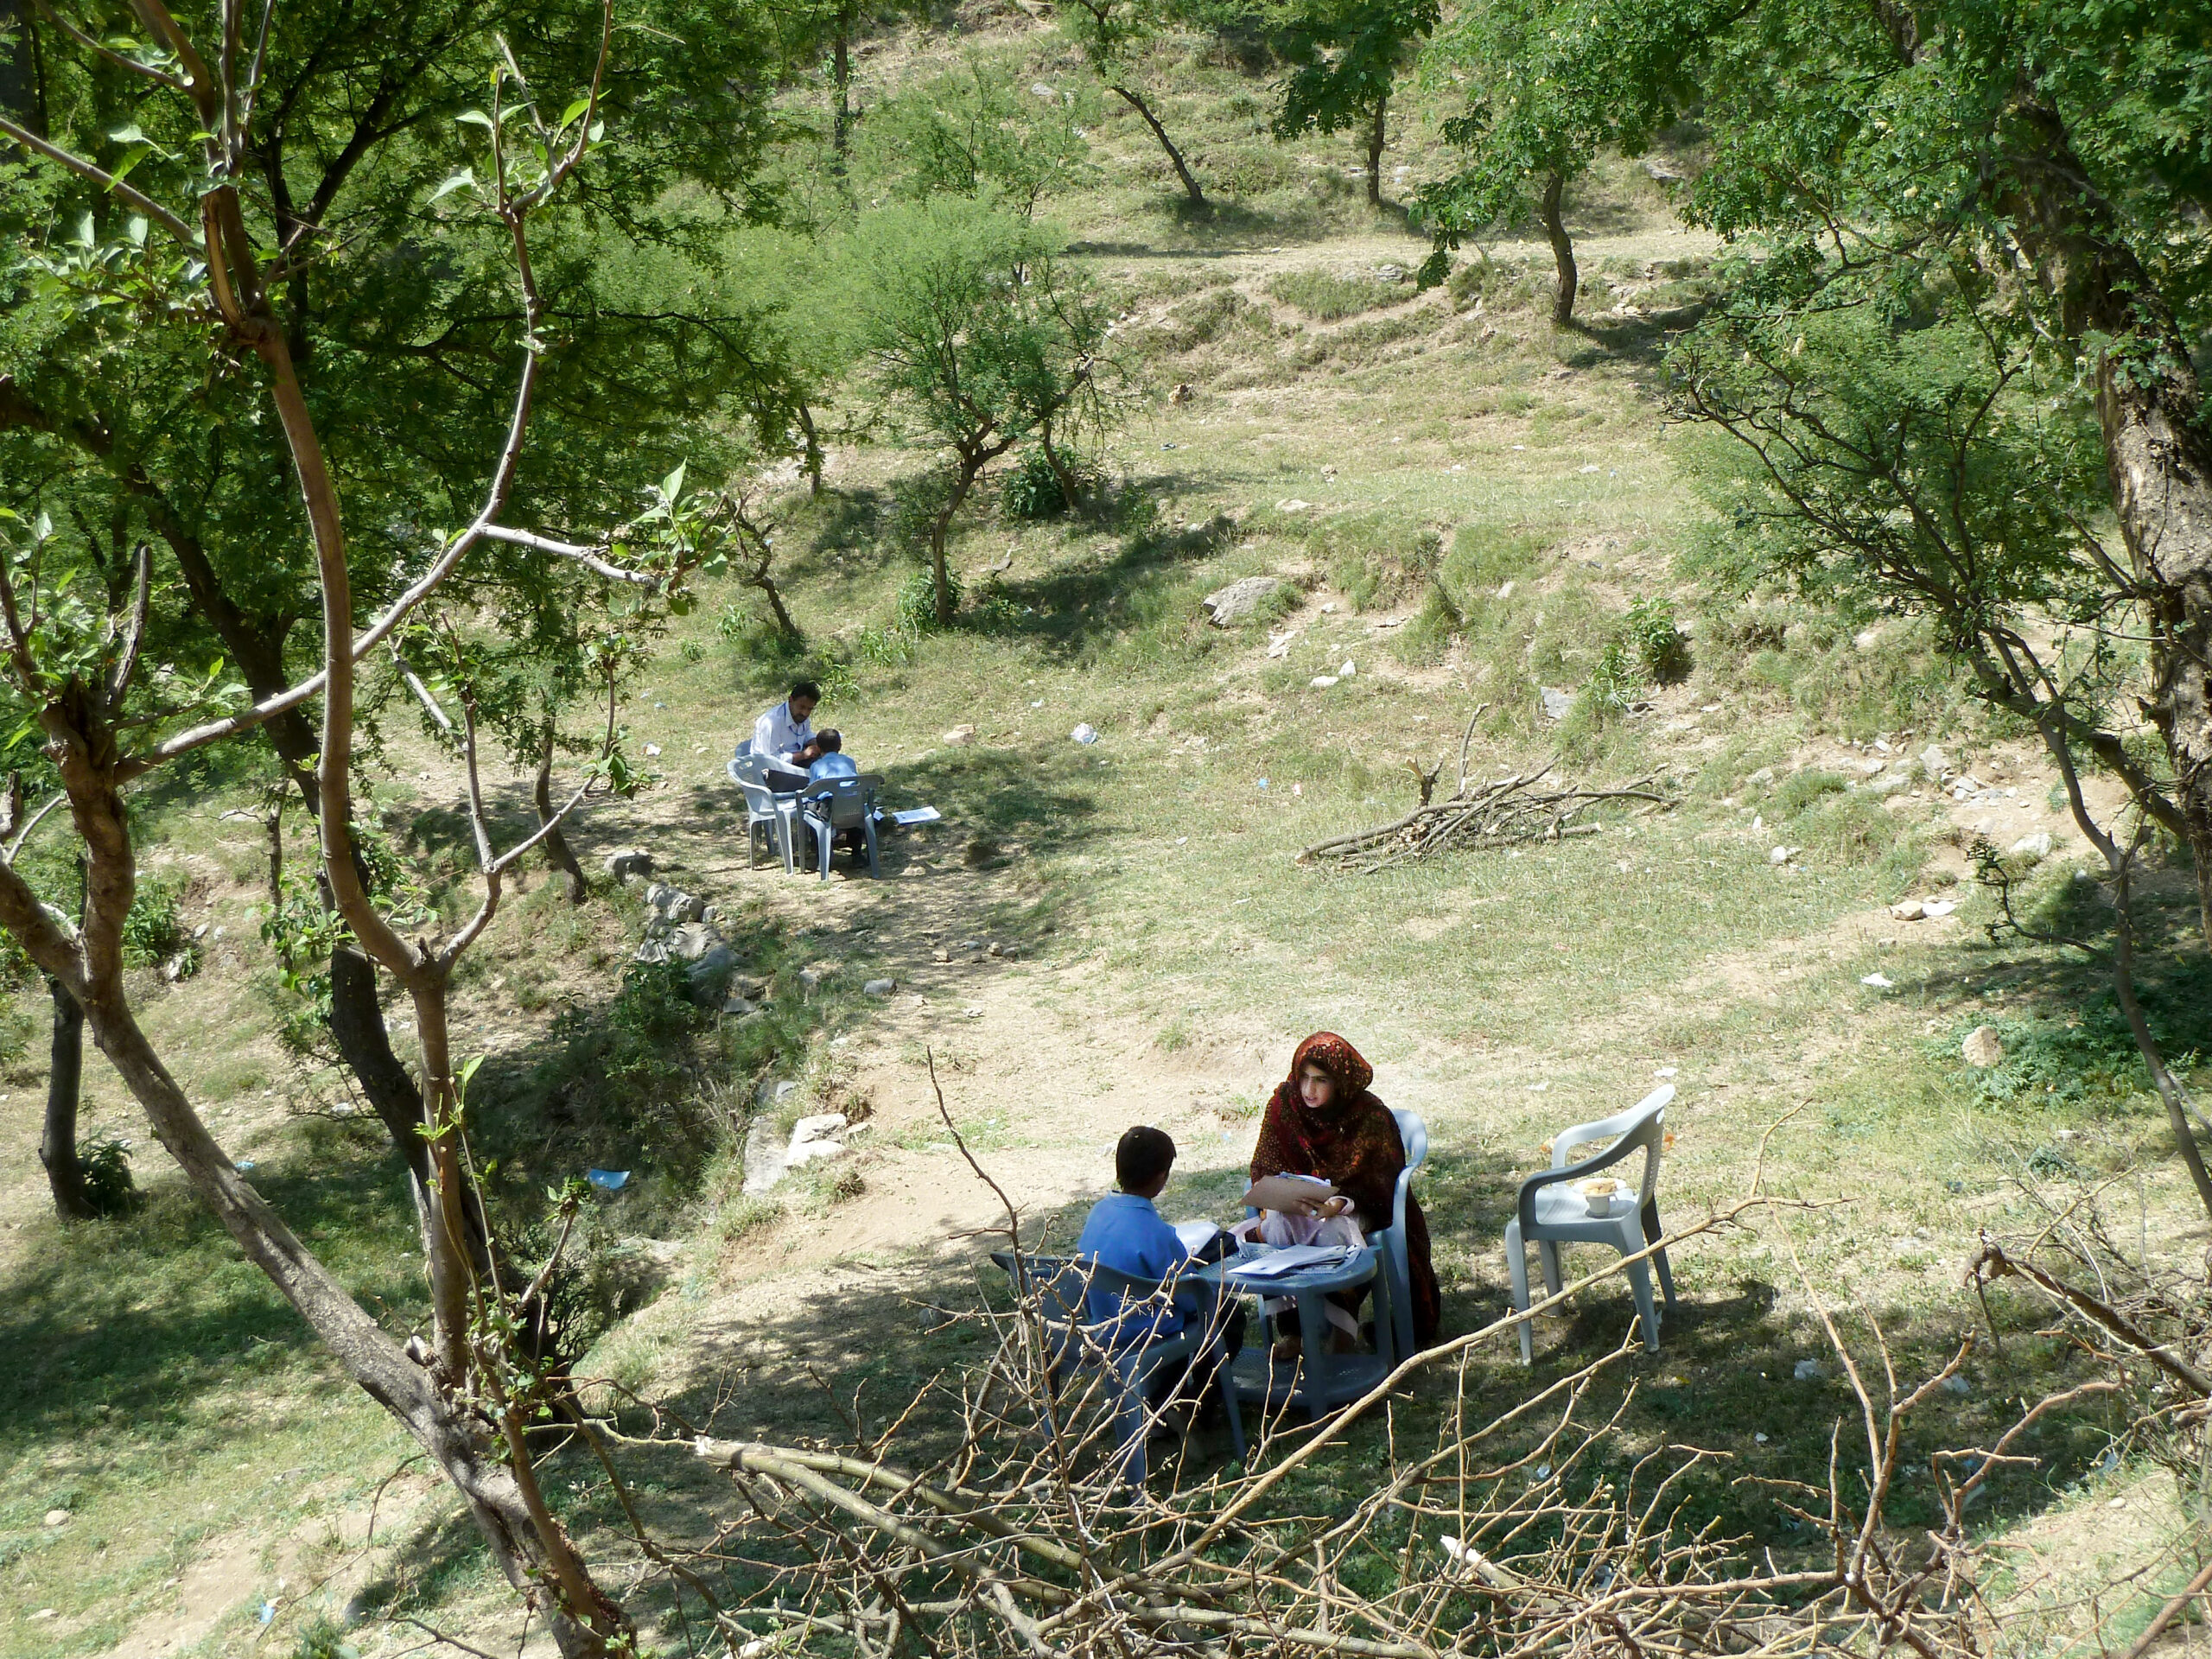 Two sets of adults and children sitting at desks in wooded field.